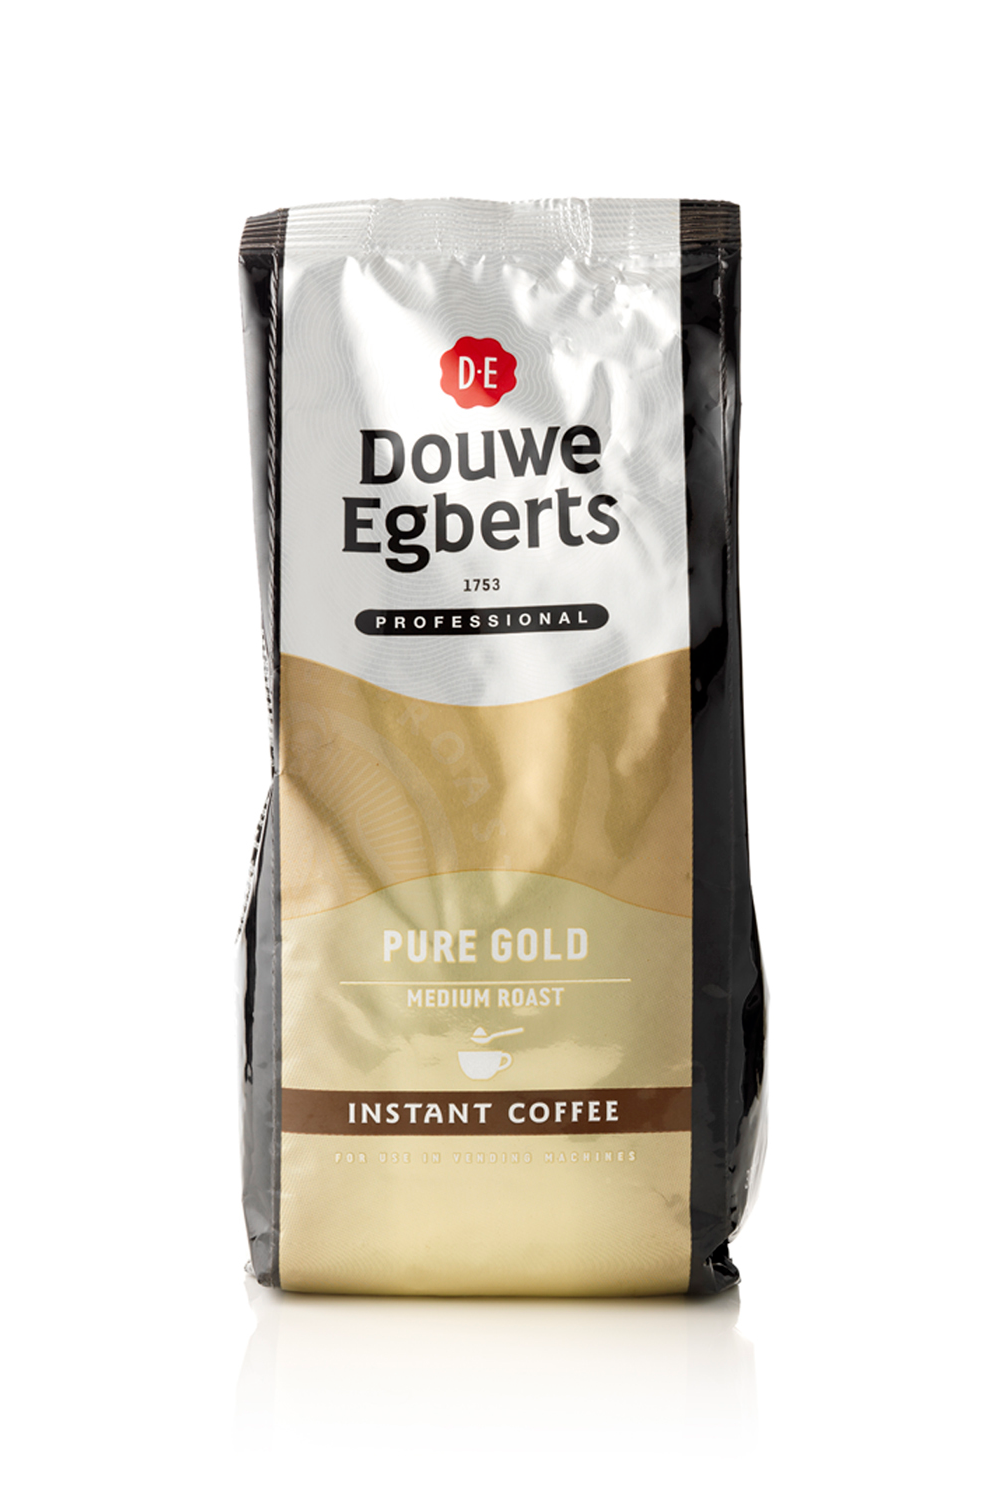 Douwe Egberts Pure Gold instant coffee 300g. For use through vending machines as a refill